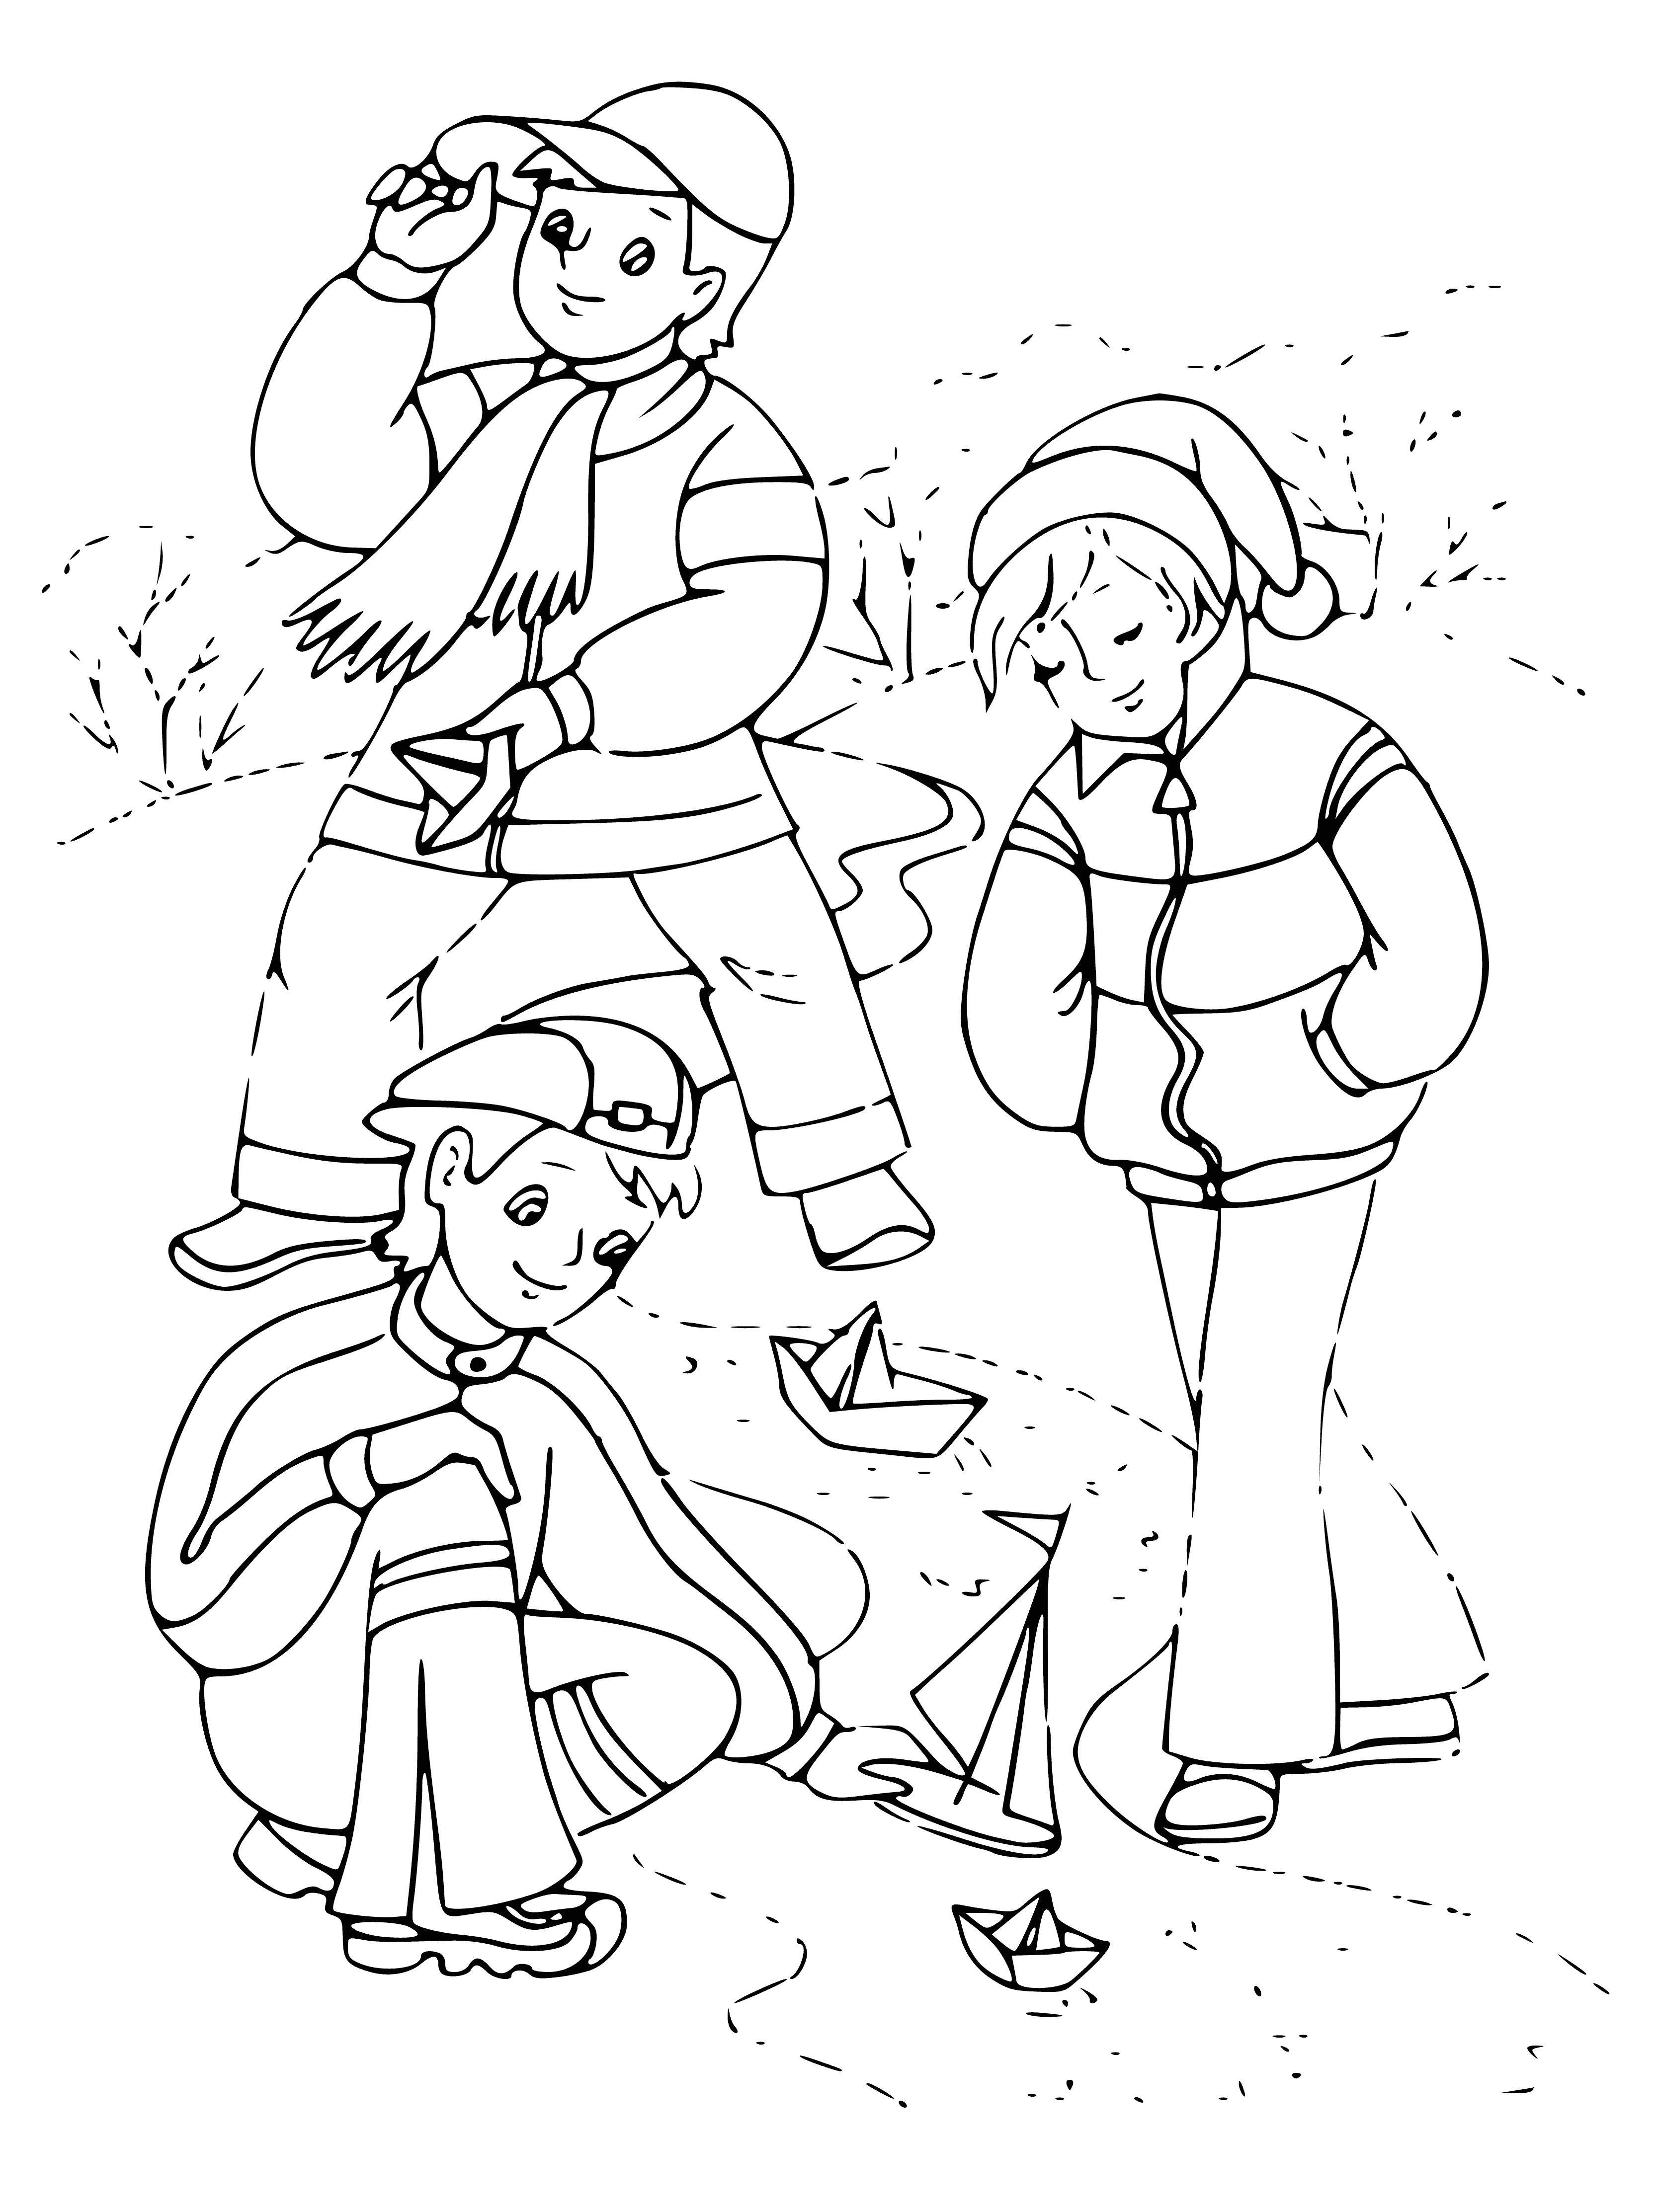 Boys launch boats in a brook coloring page